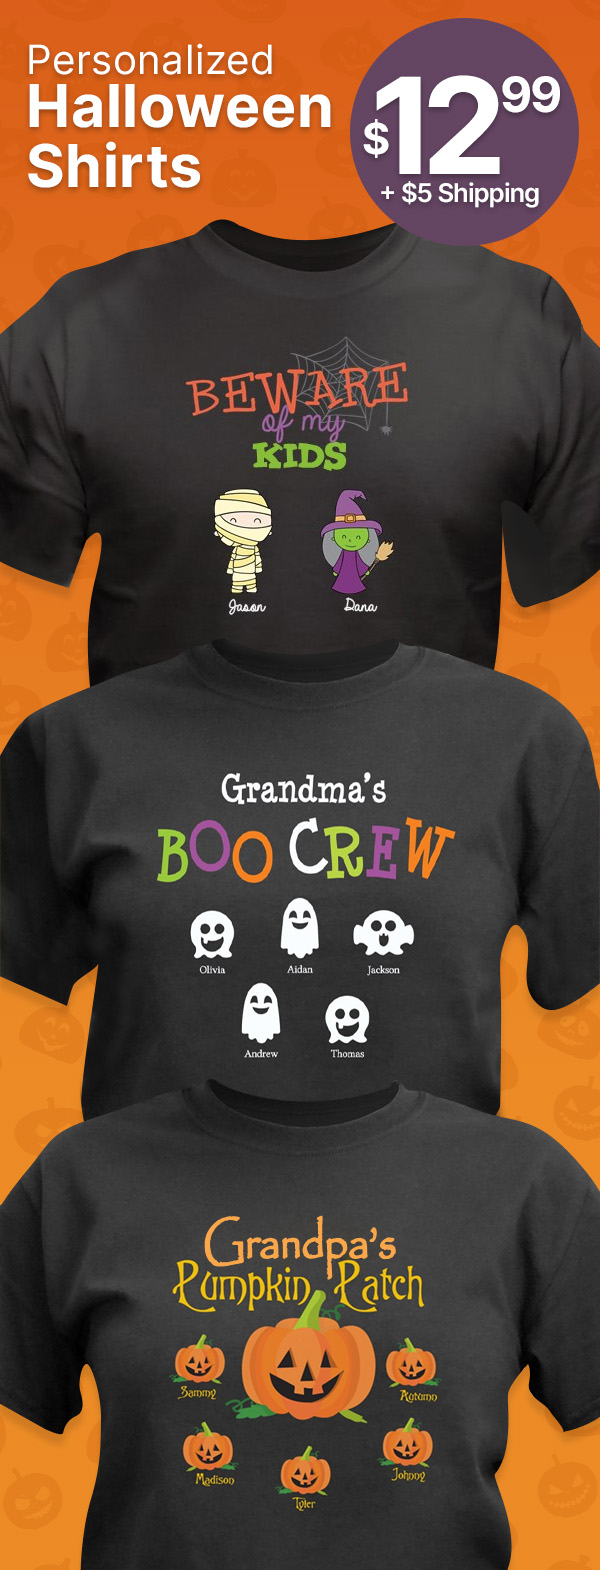 $12.99 Personalized Halloween Shirts With $5 Shipping With Code: SCARY12LS